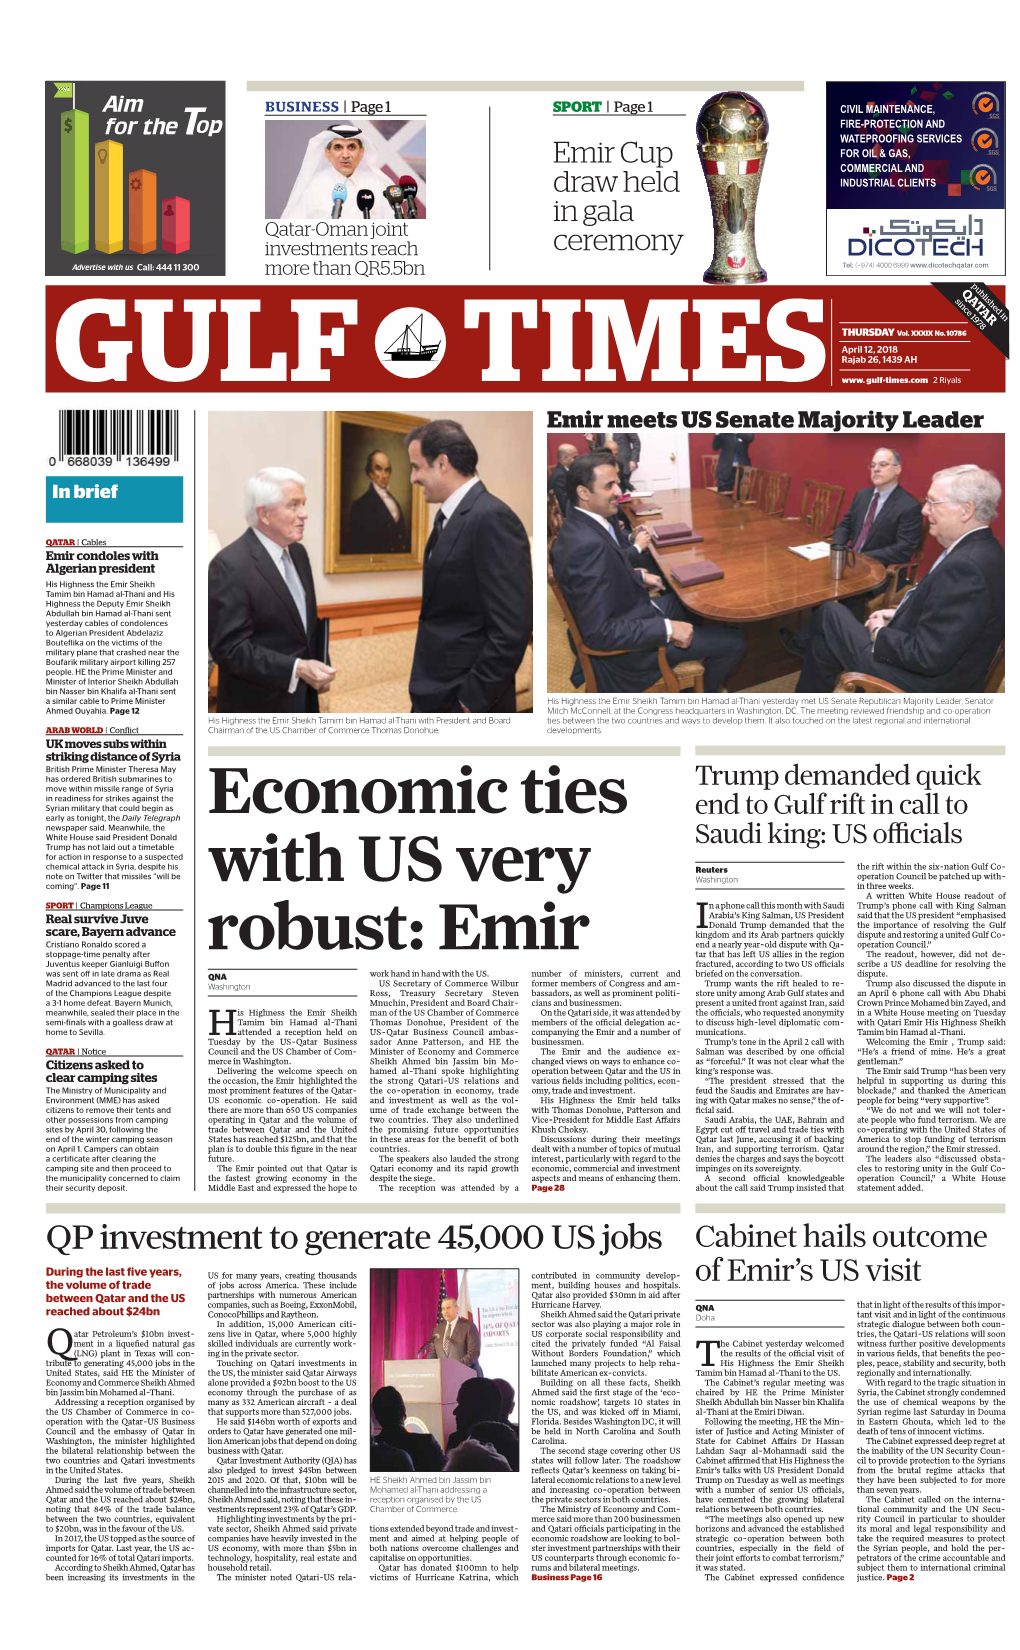 Emir Cup Draw Held in Gala Qatar-Oman Joint Investments Reach Ceremony More Than QR5.5Bn Published in QATAR Since 1978